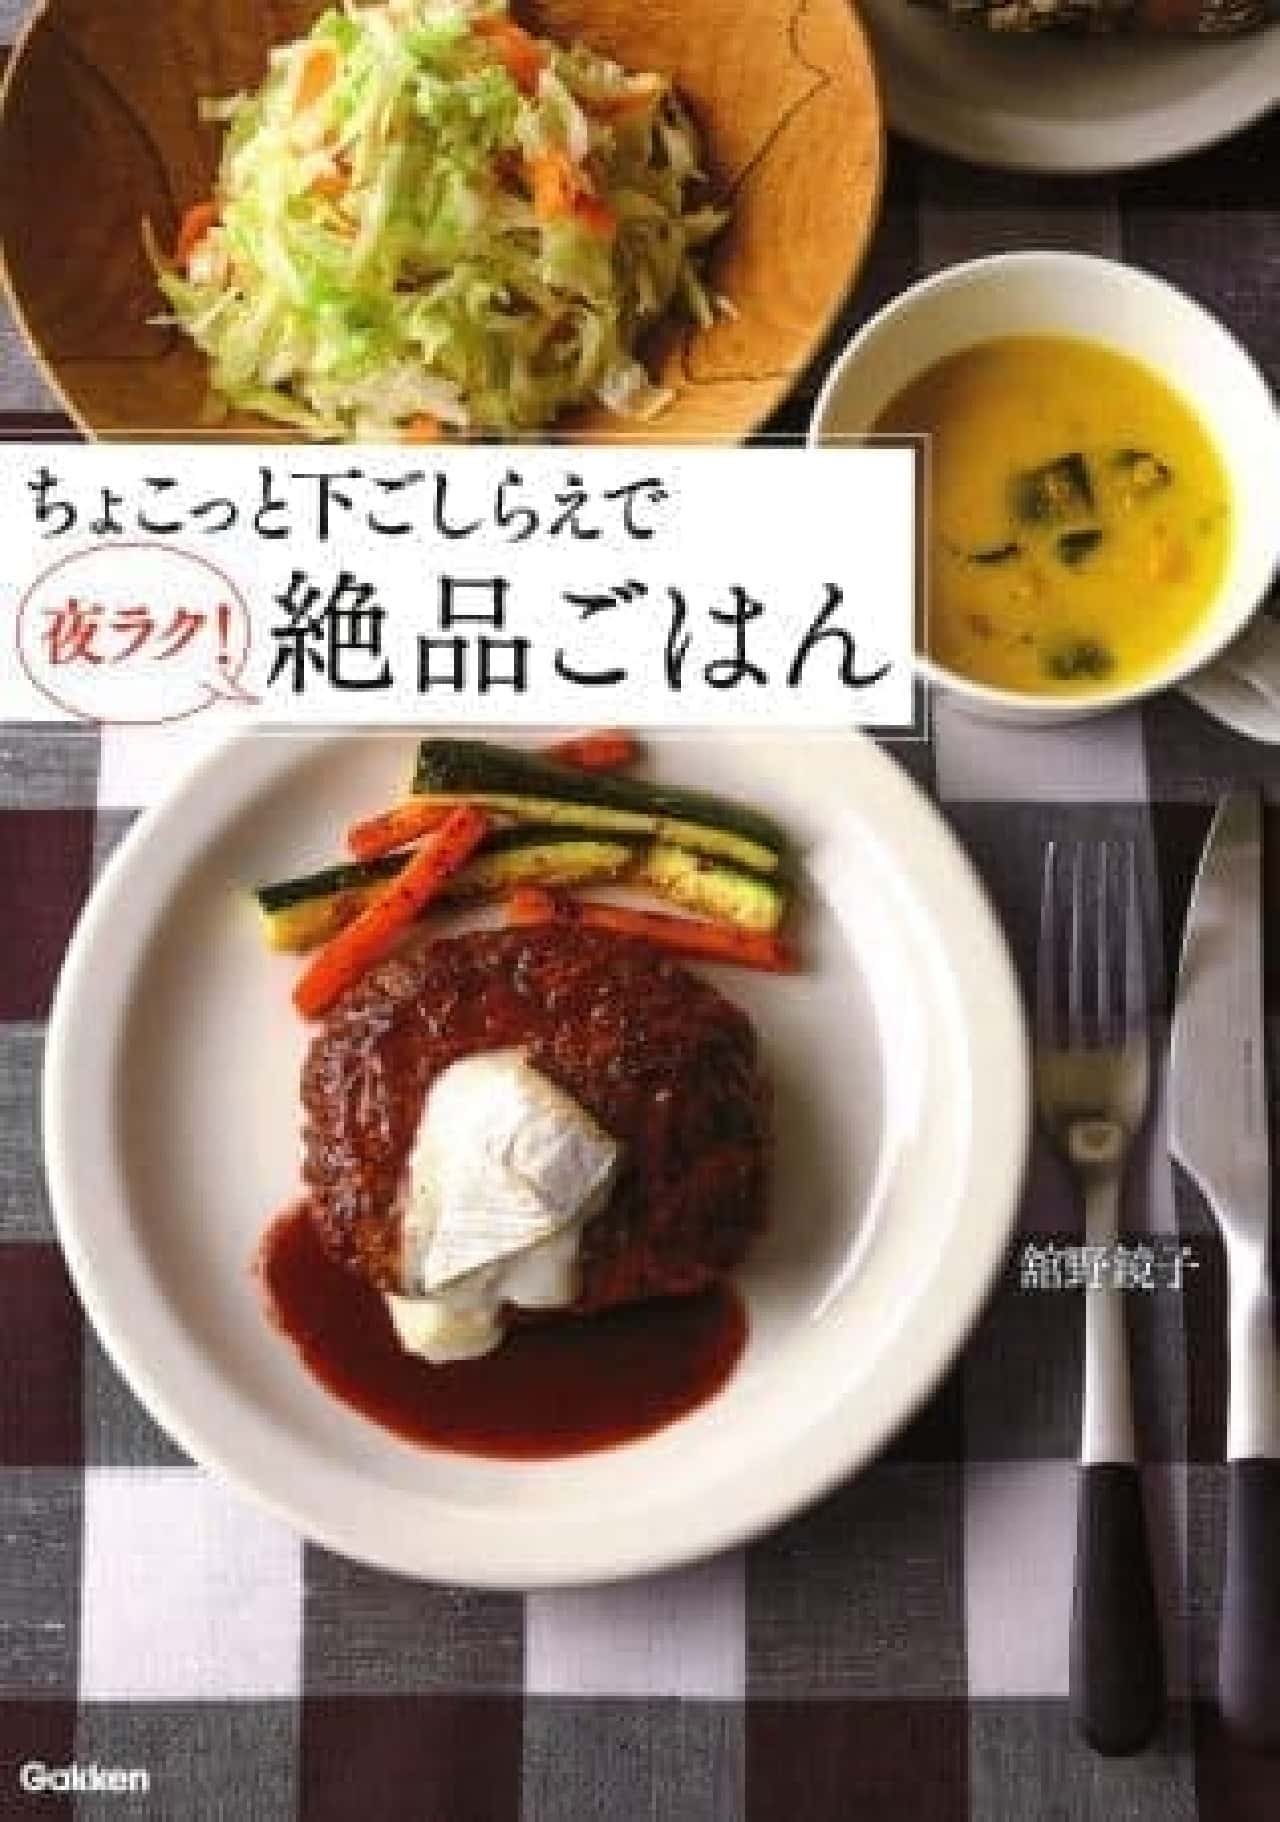 Cookbook "A little preparation makes it easy at night! Exquisite rice"